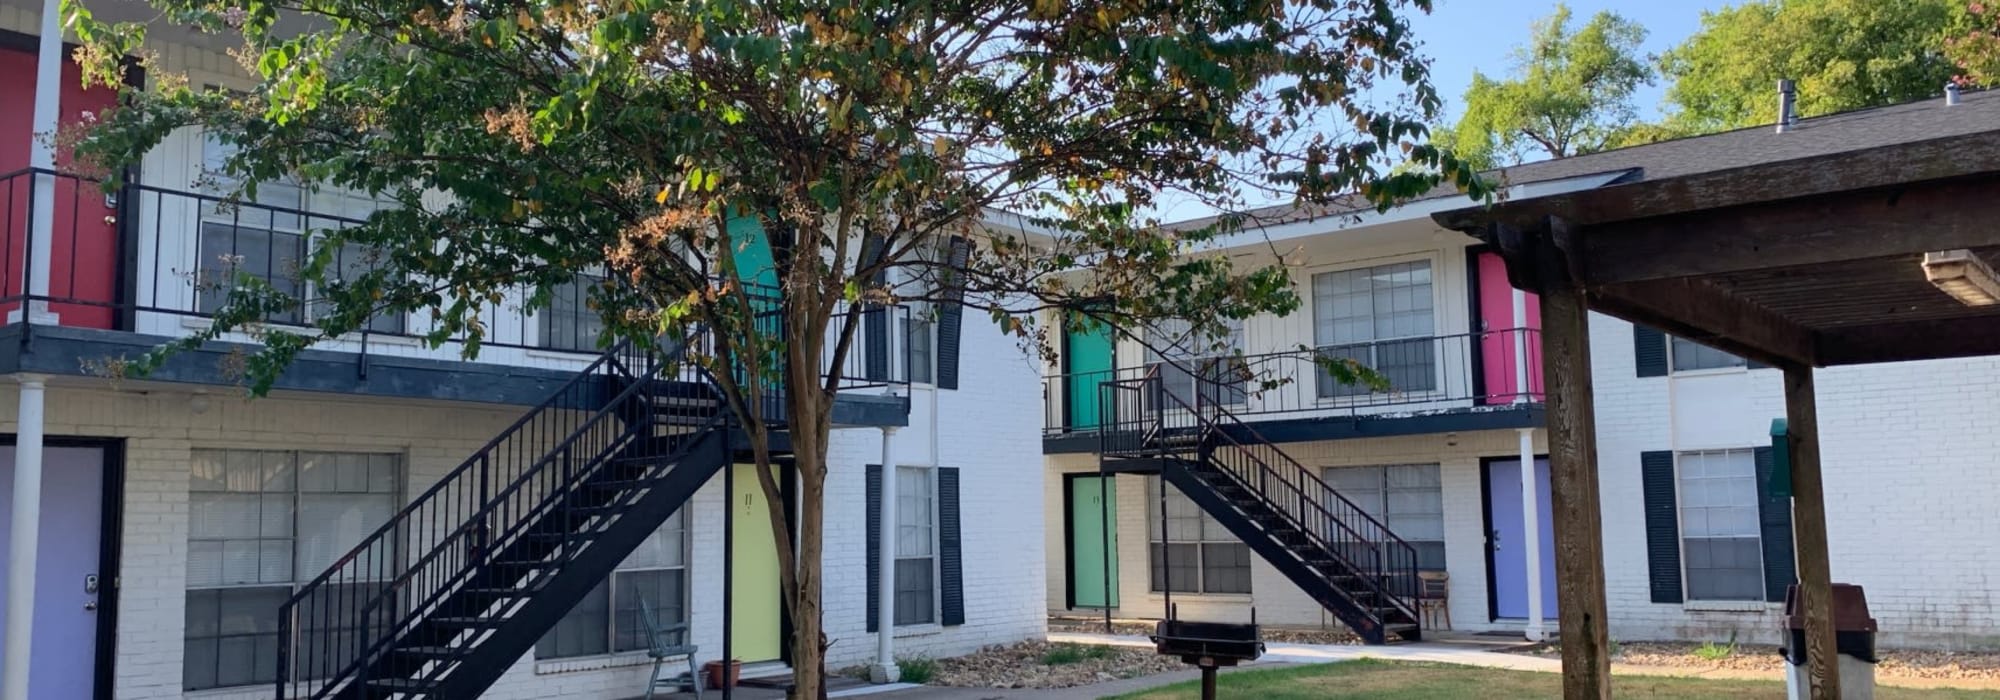 Apartment buidlings at Midtown Manor and Towers in Bryan, Texas